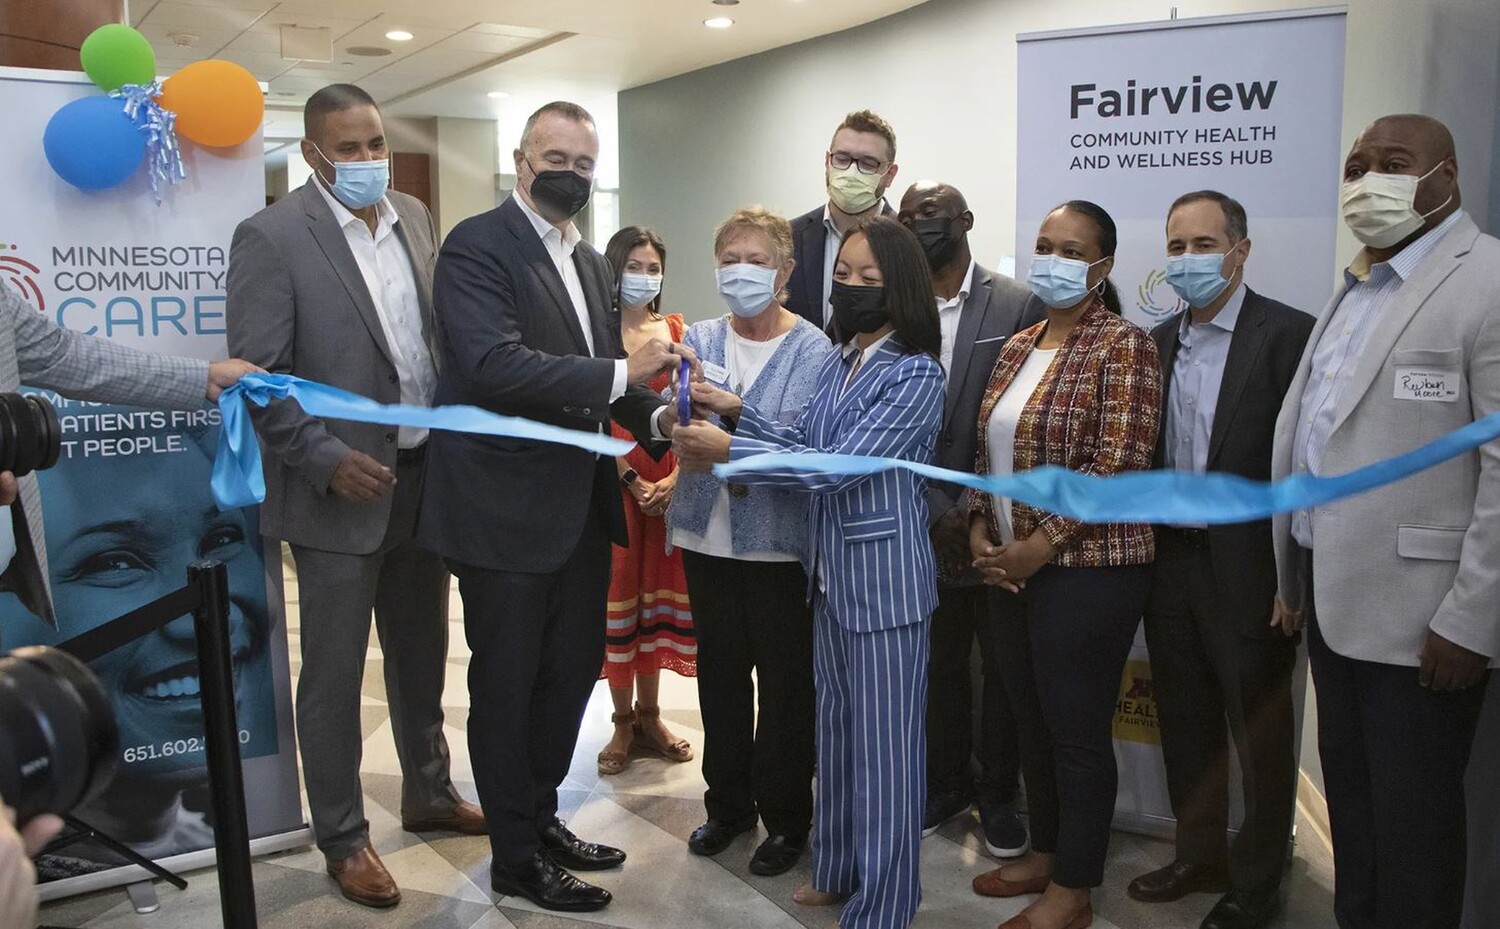 a diverse group of people cut a ceremonial ribbon at the opening of the Fairview Community Health and Wellness Hub